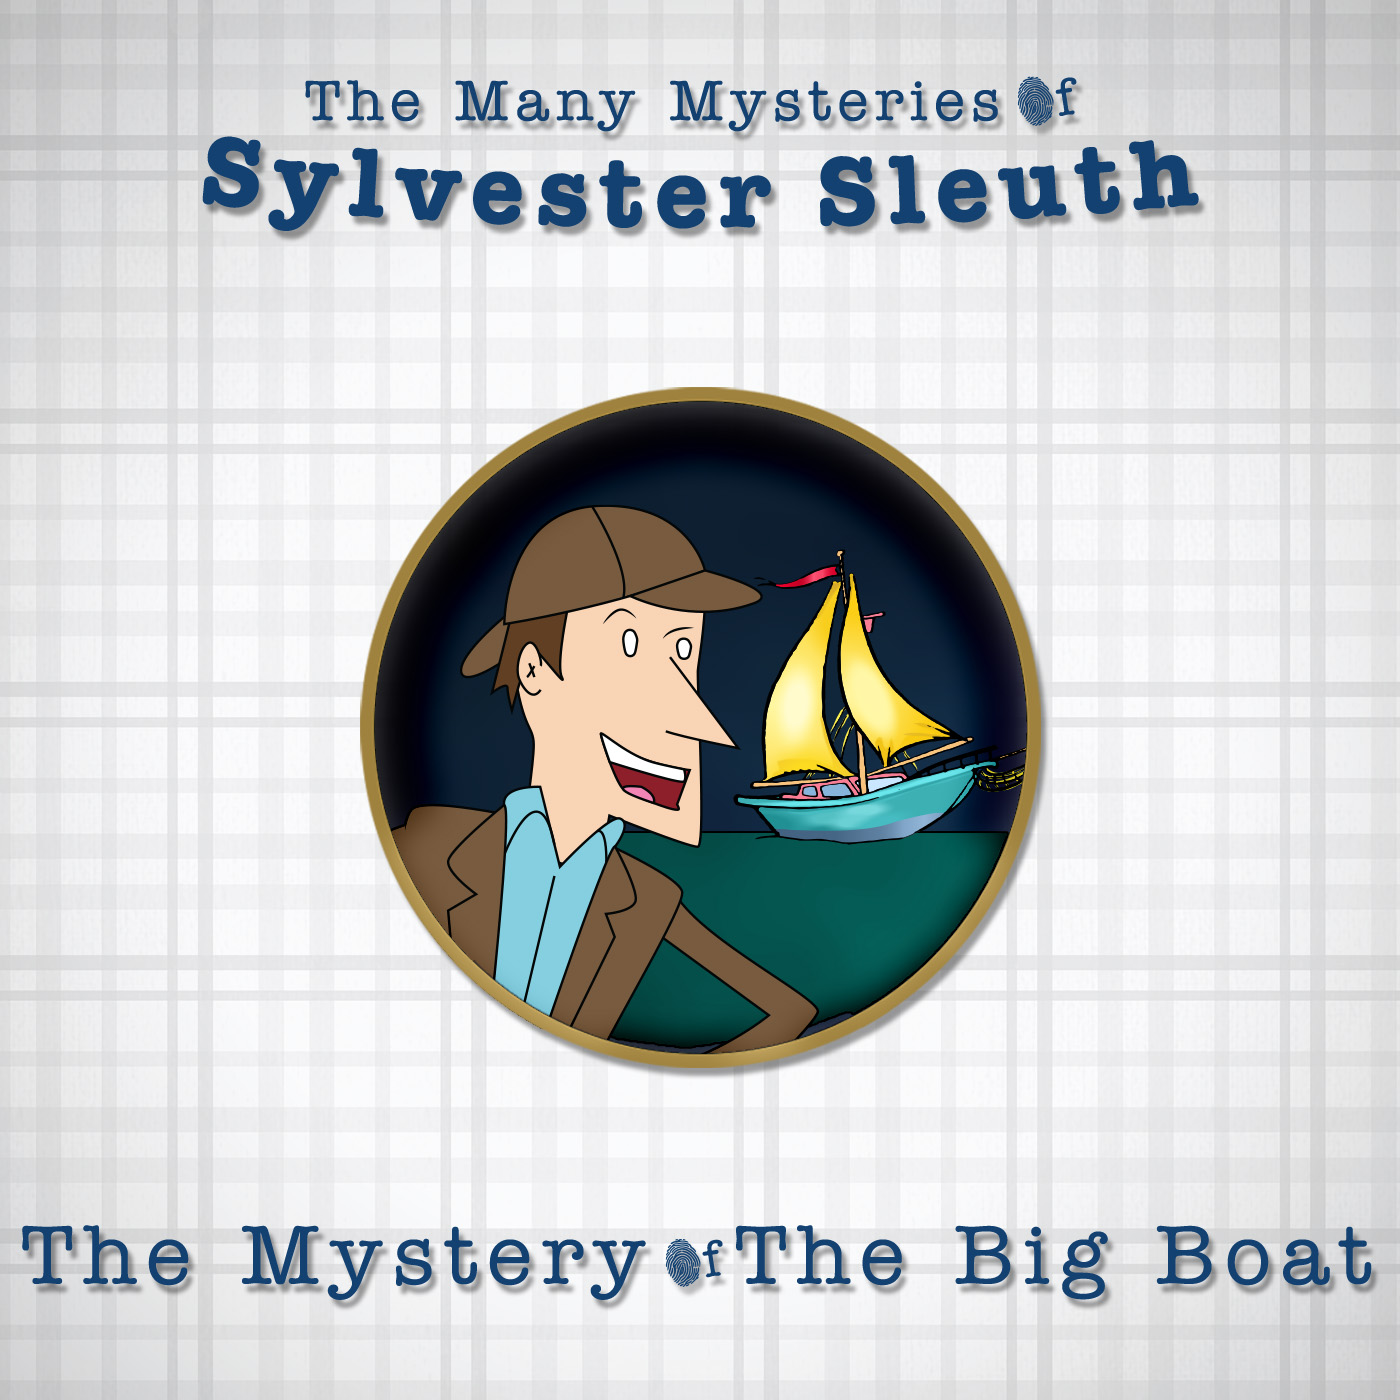 Sylvester Sleuth and the Mystery of the Big Boat